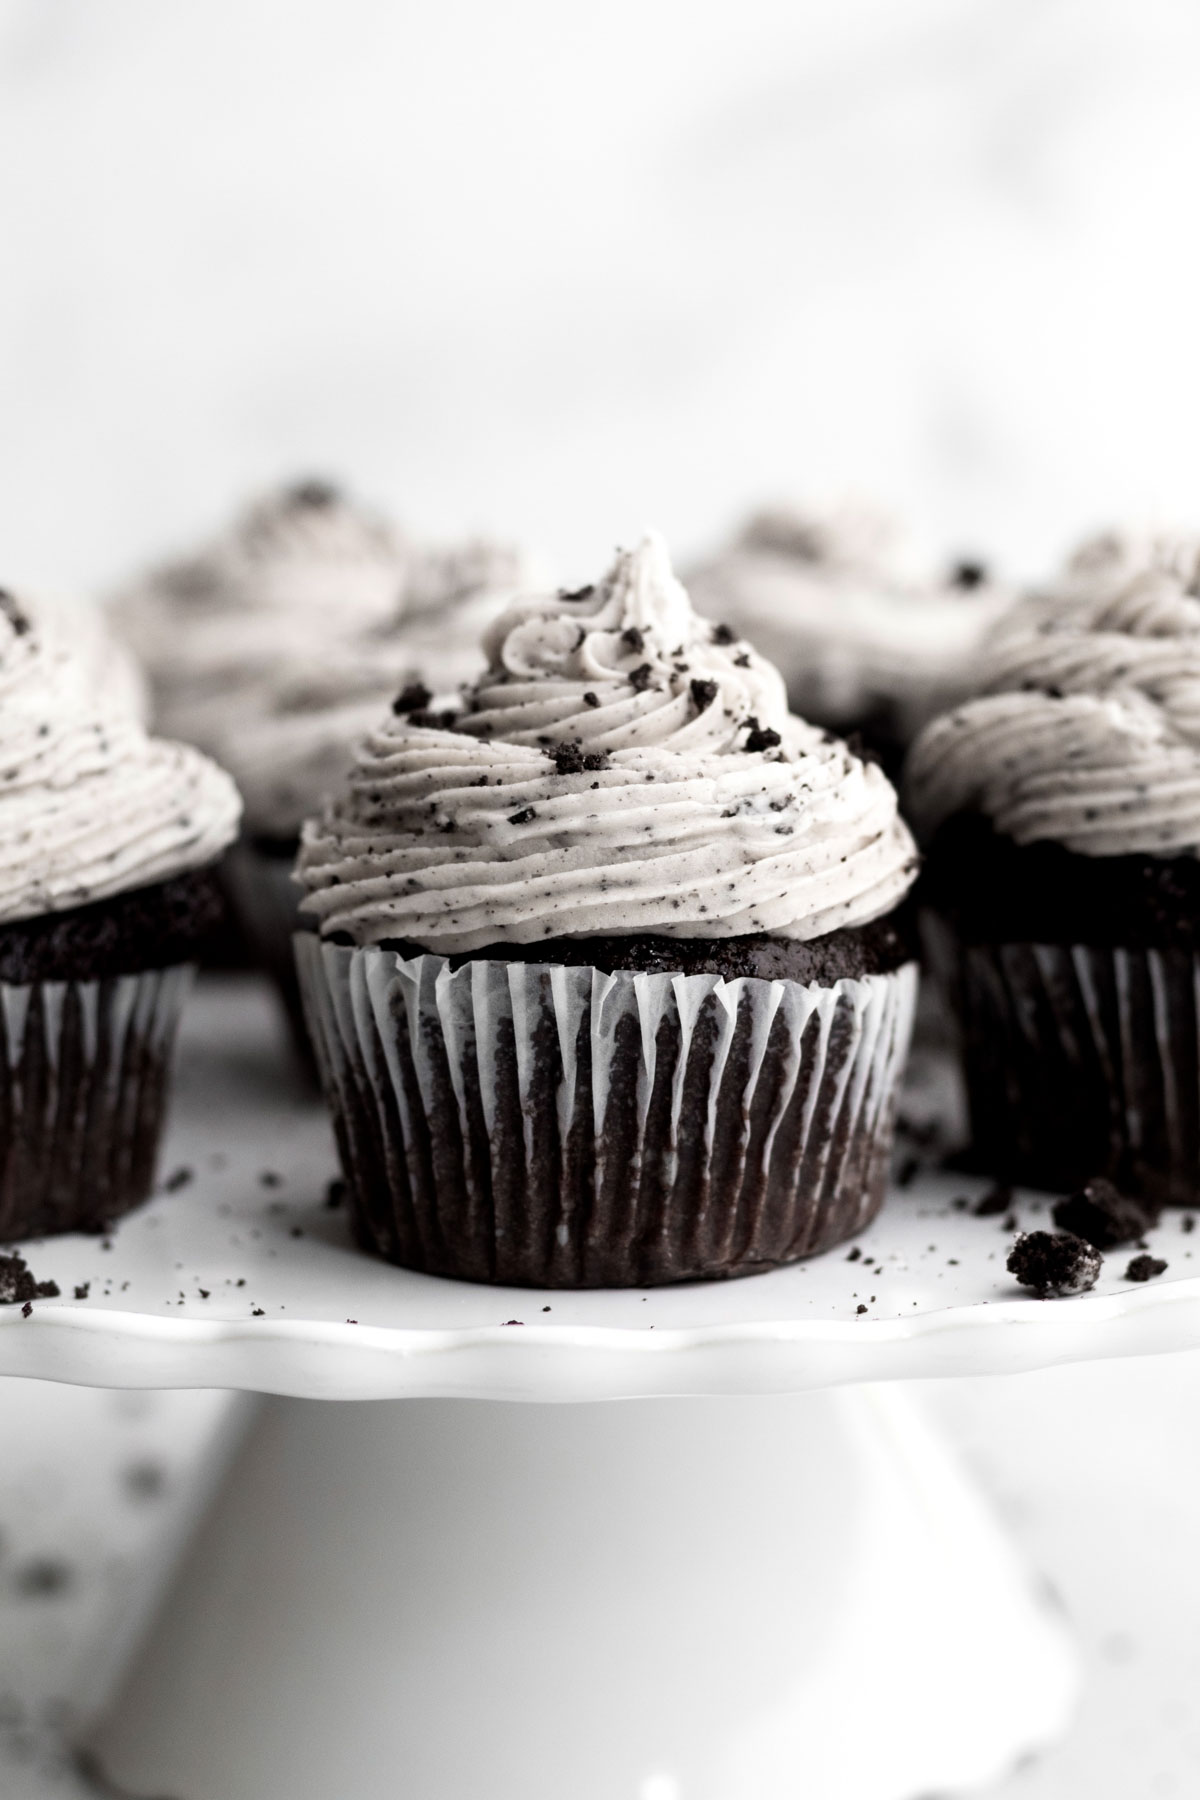 Topping the vanilla filled baked cupcake with a perfect swirl of cookies and cream frosting.